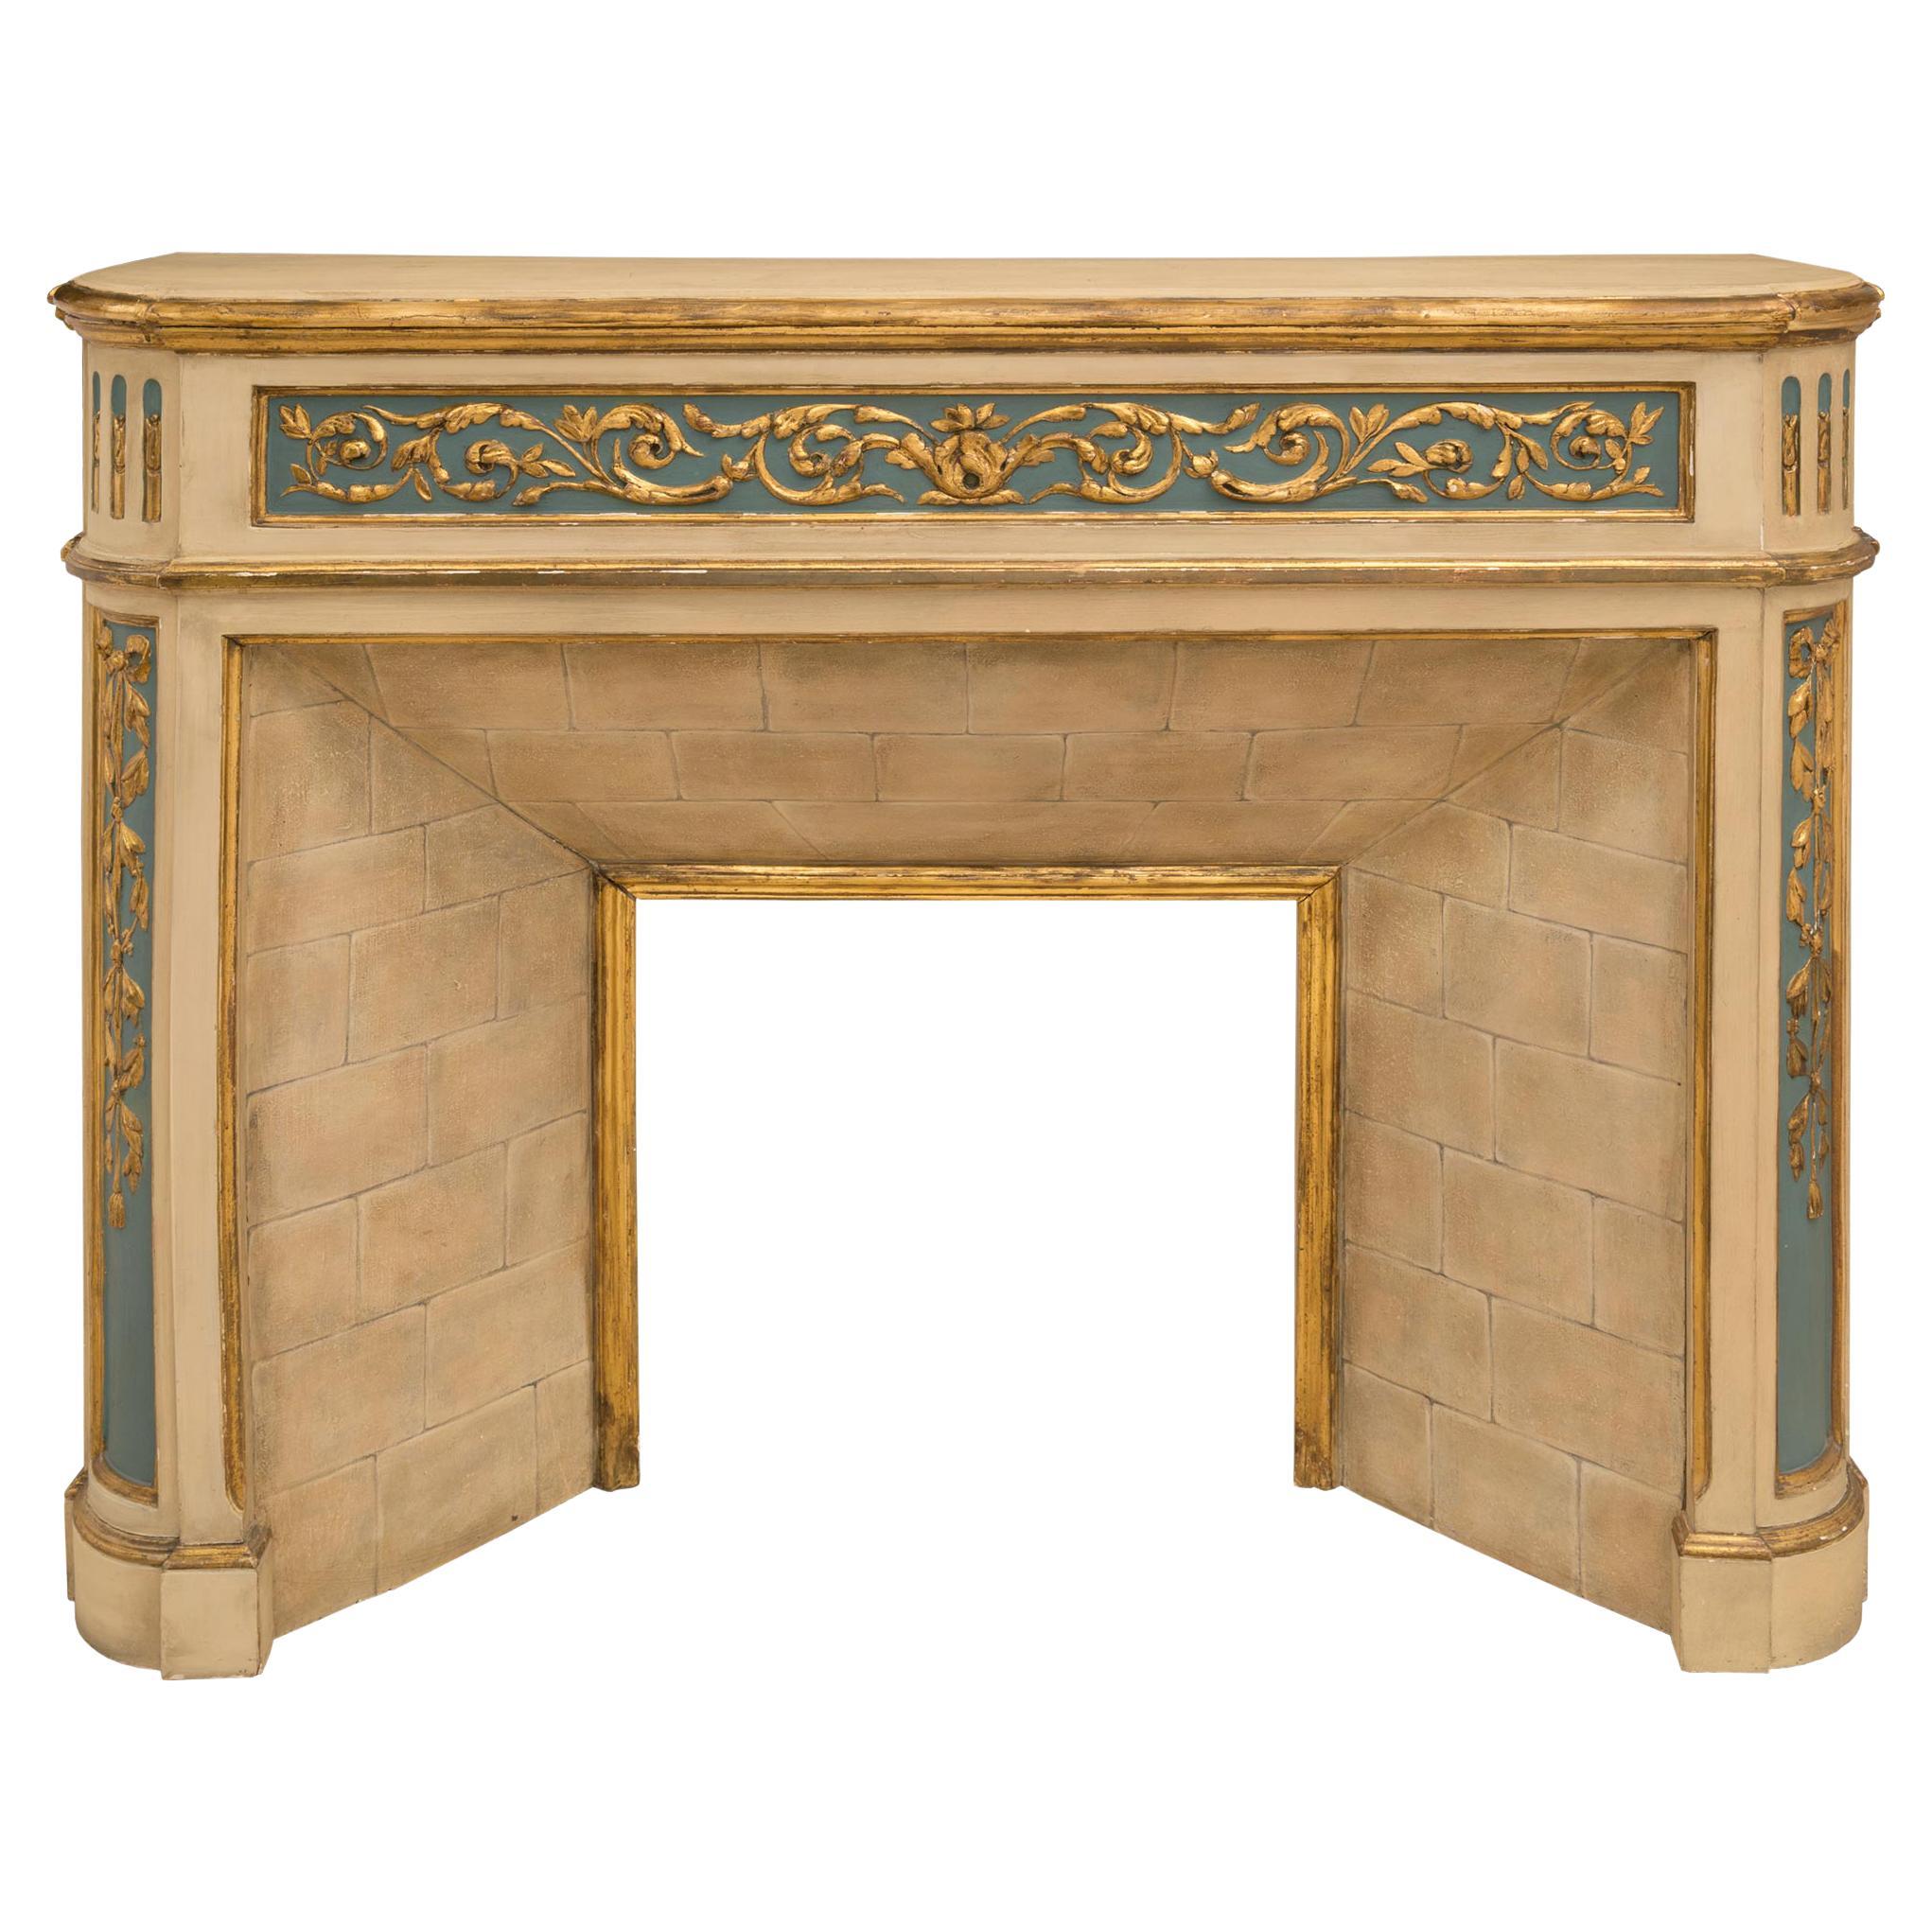 French Mid-19th Century Louis XVI Style Patinated and Giltwood Fireplace Mantel For Sale